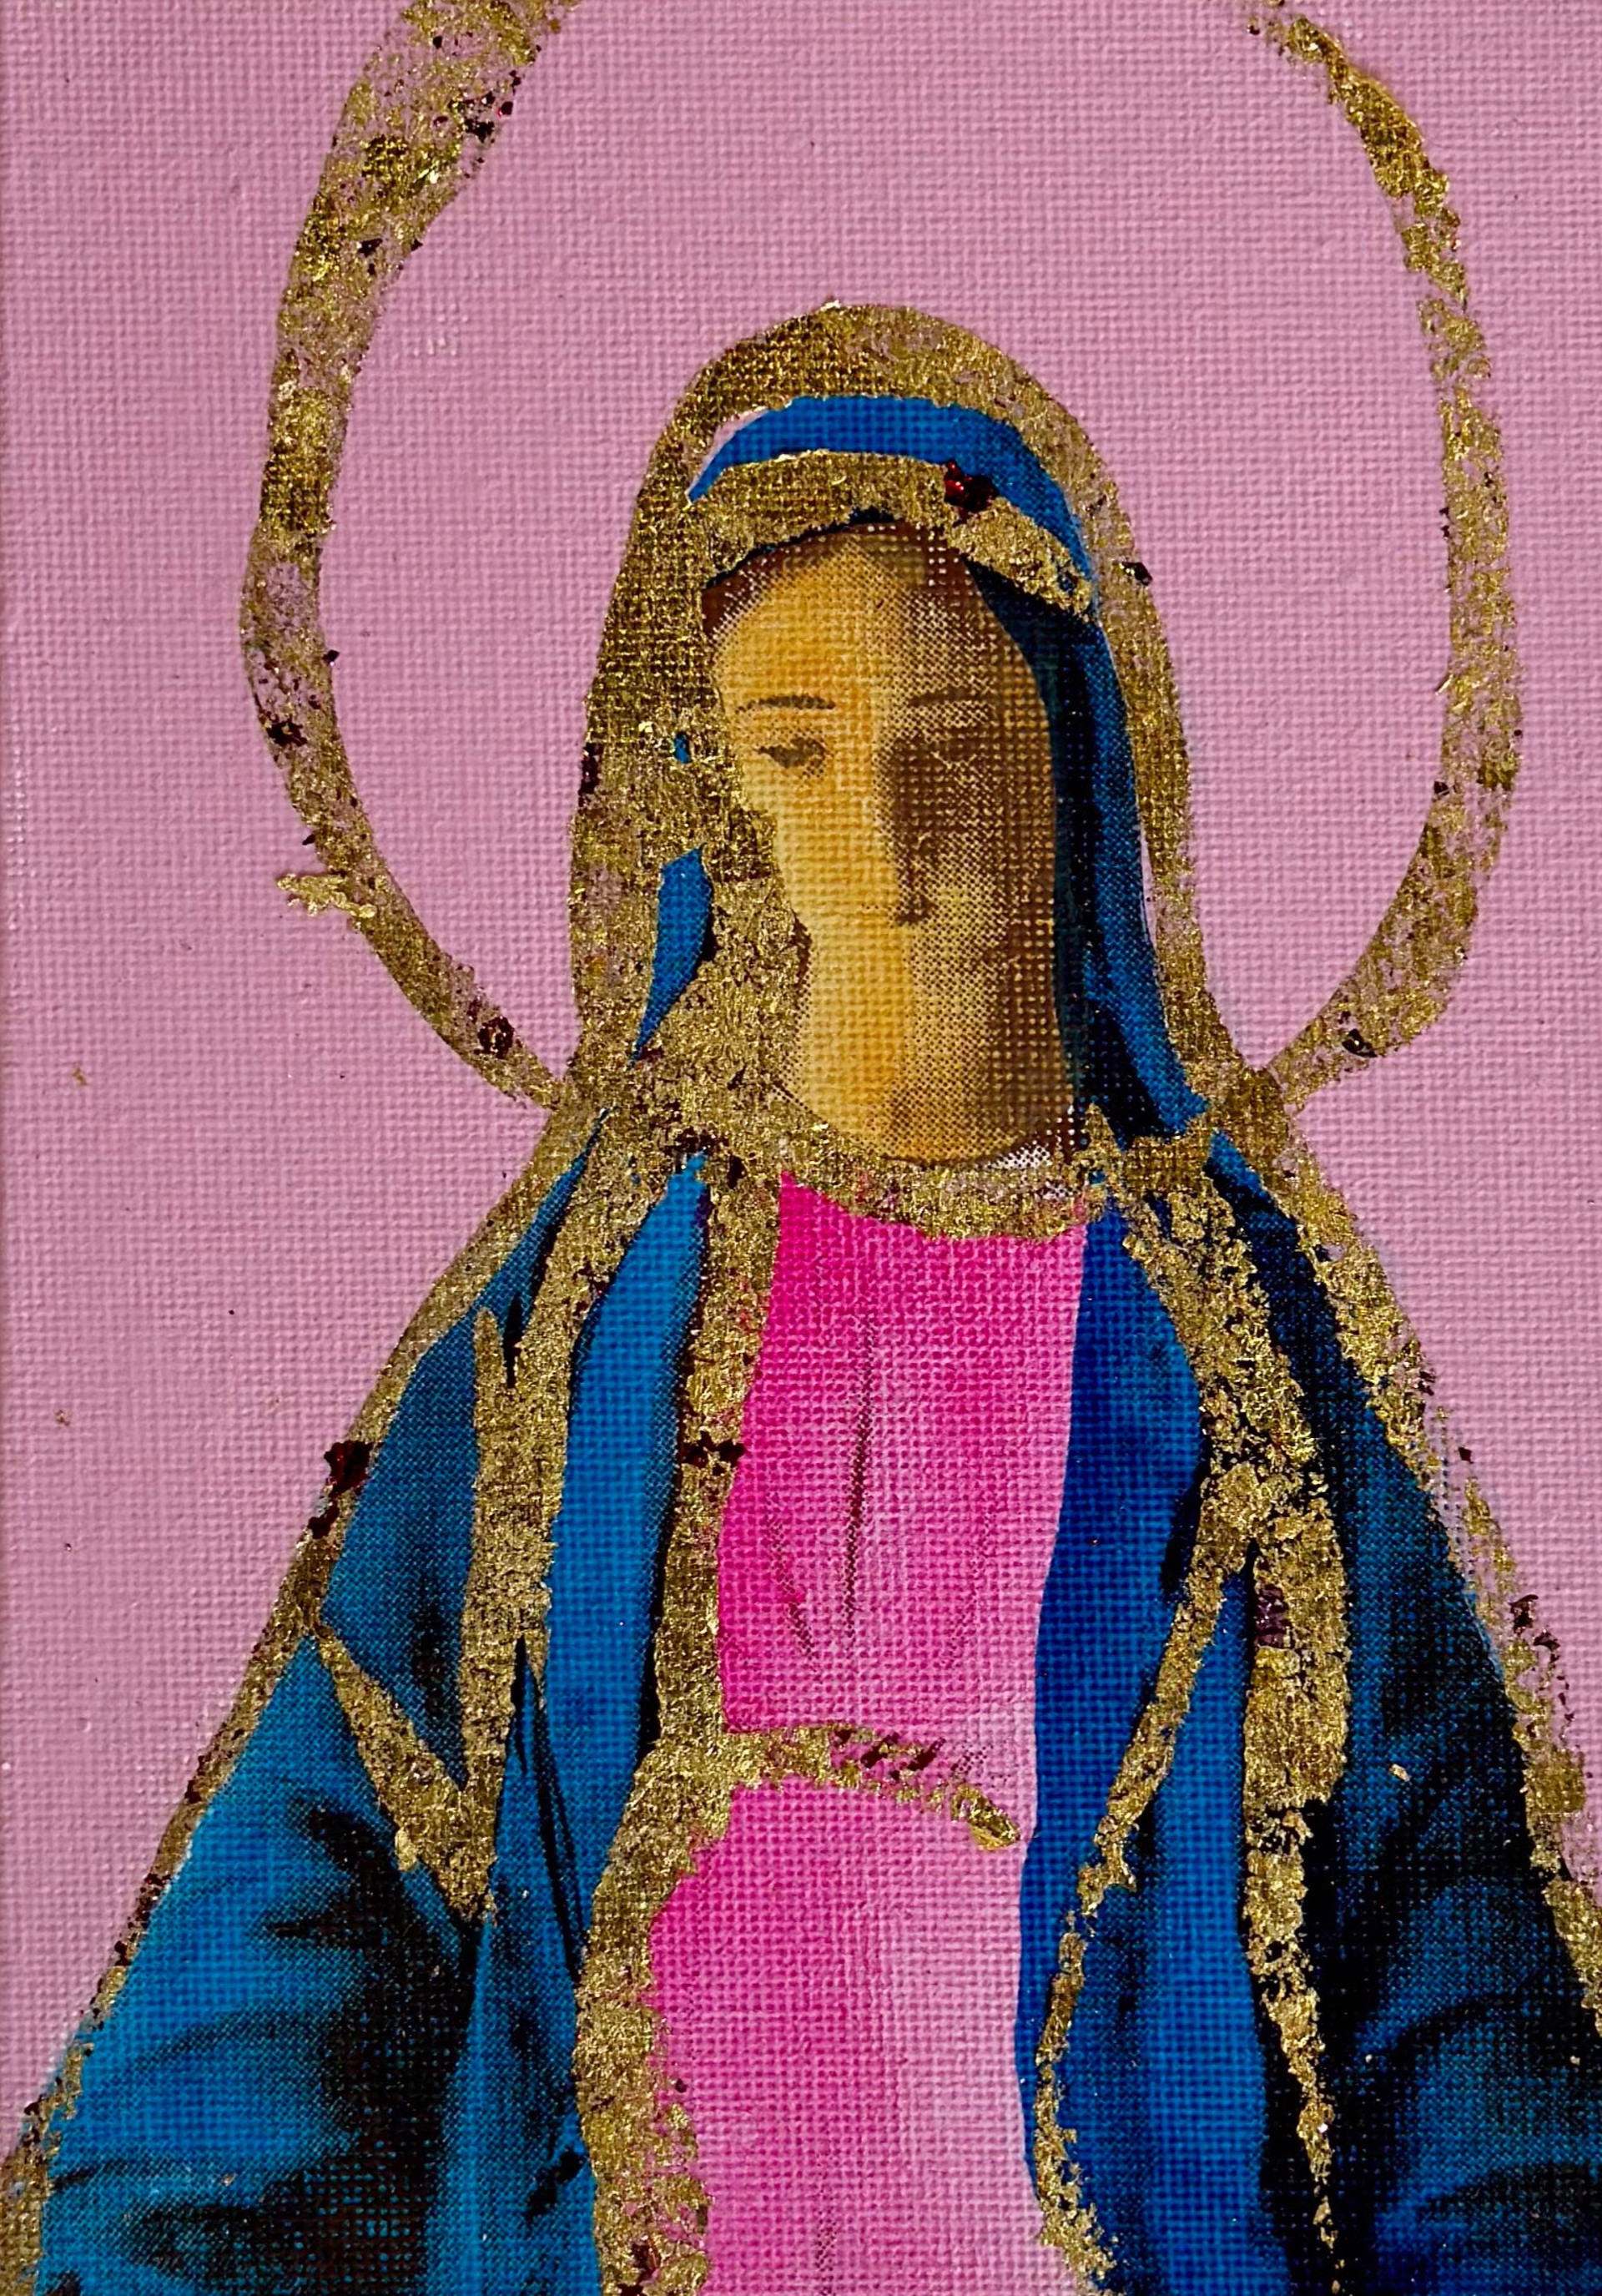 Hail Mary 11 by Megan Coonelly